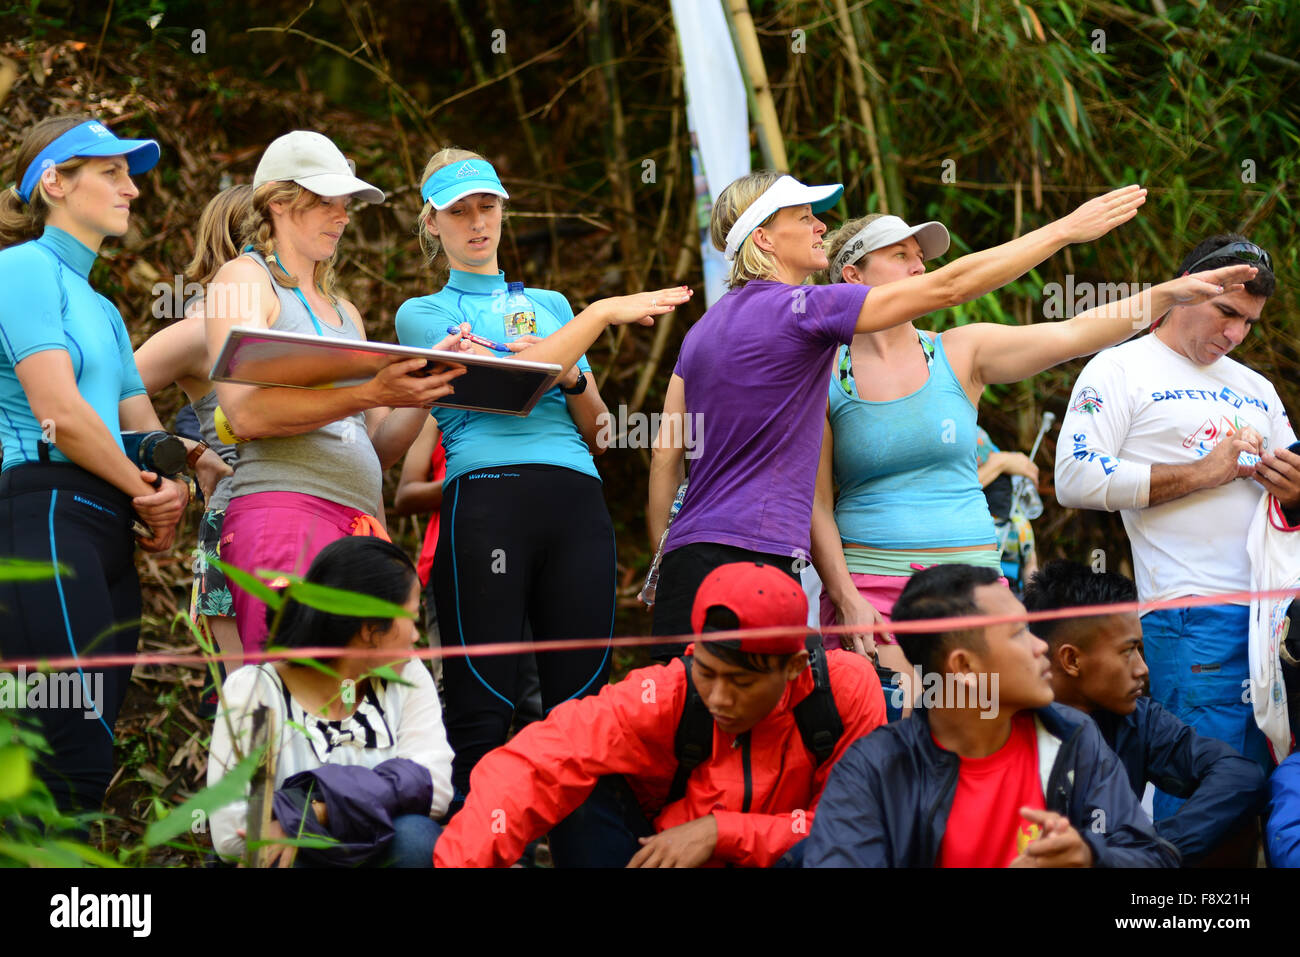 Rafters of different teams scouting the route before slalom race category during the 2015 World Rafting Championships. Stock Photo